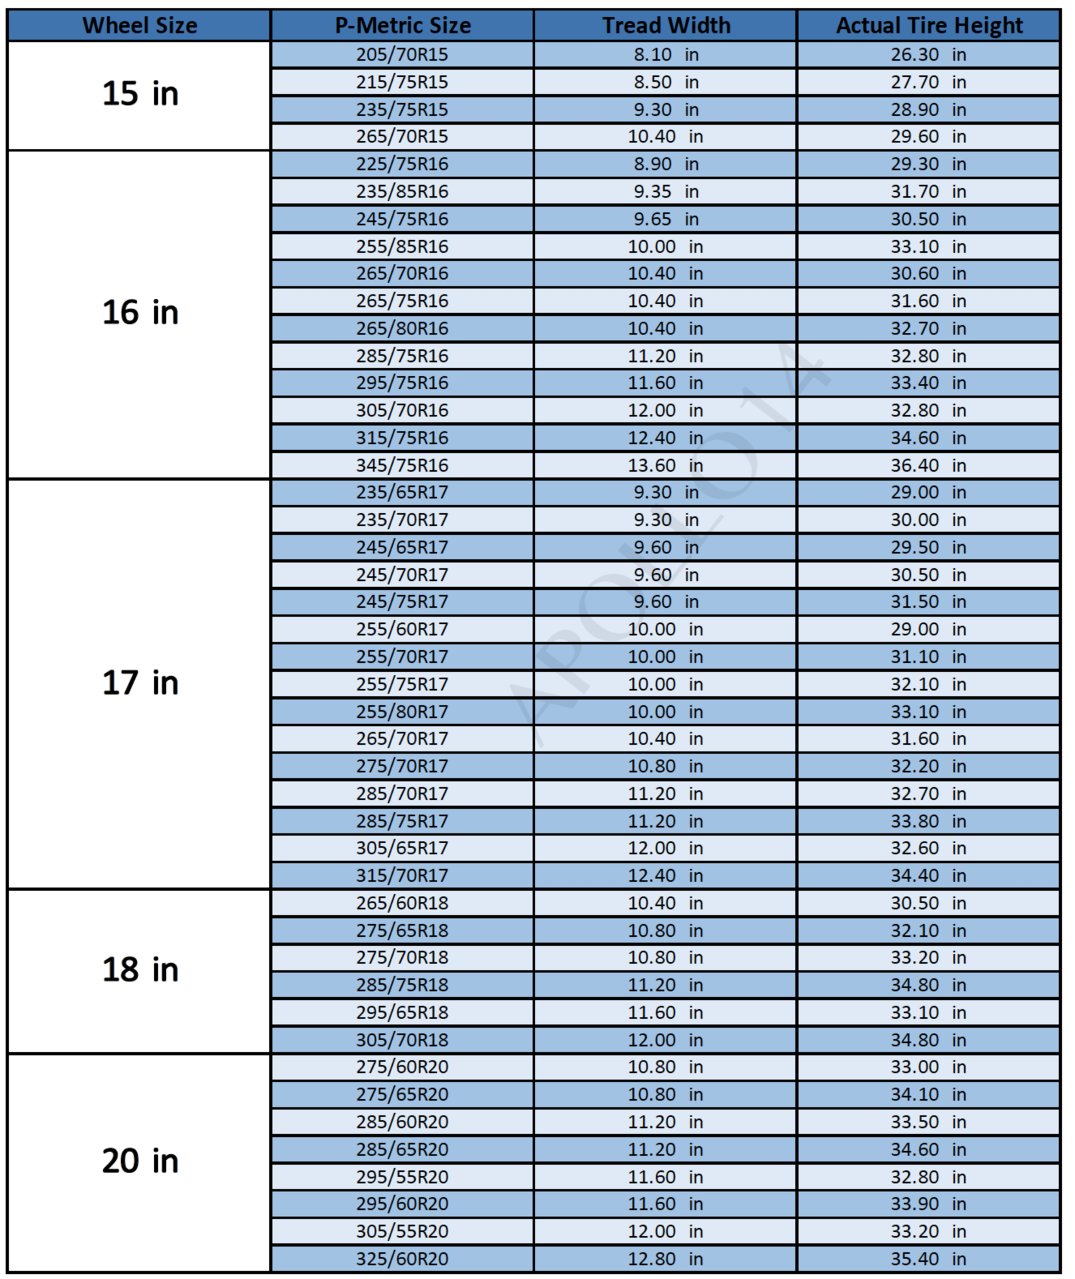 11 R 22 5 Truck Tire Size Conversion Chart To Metric